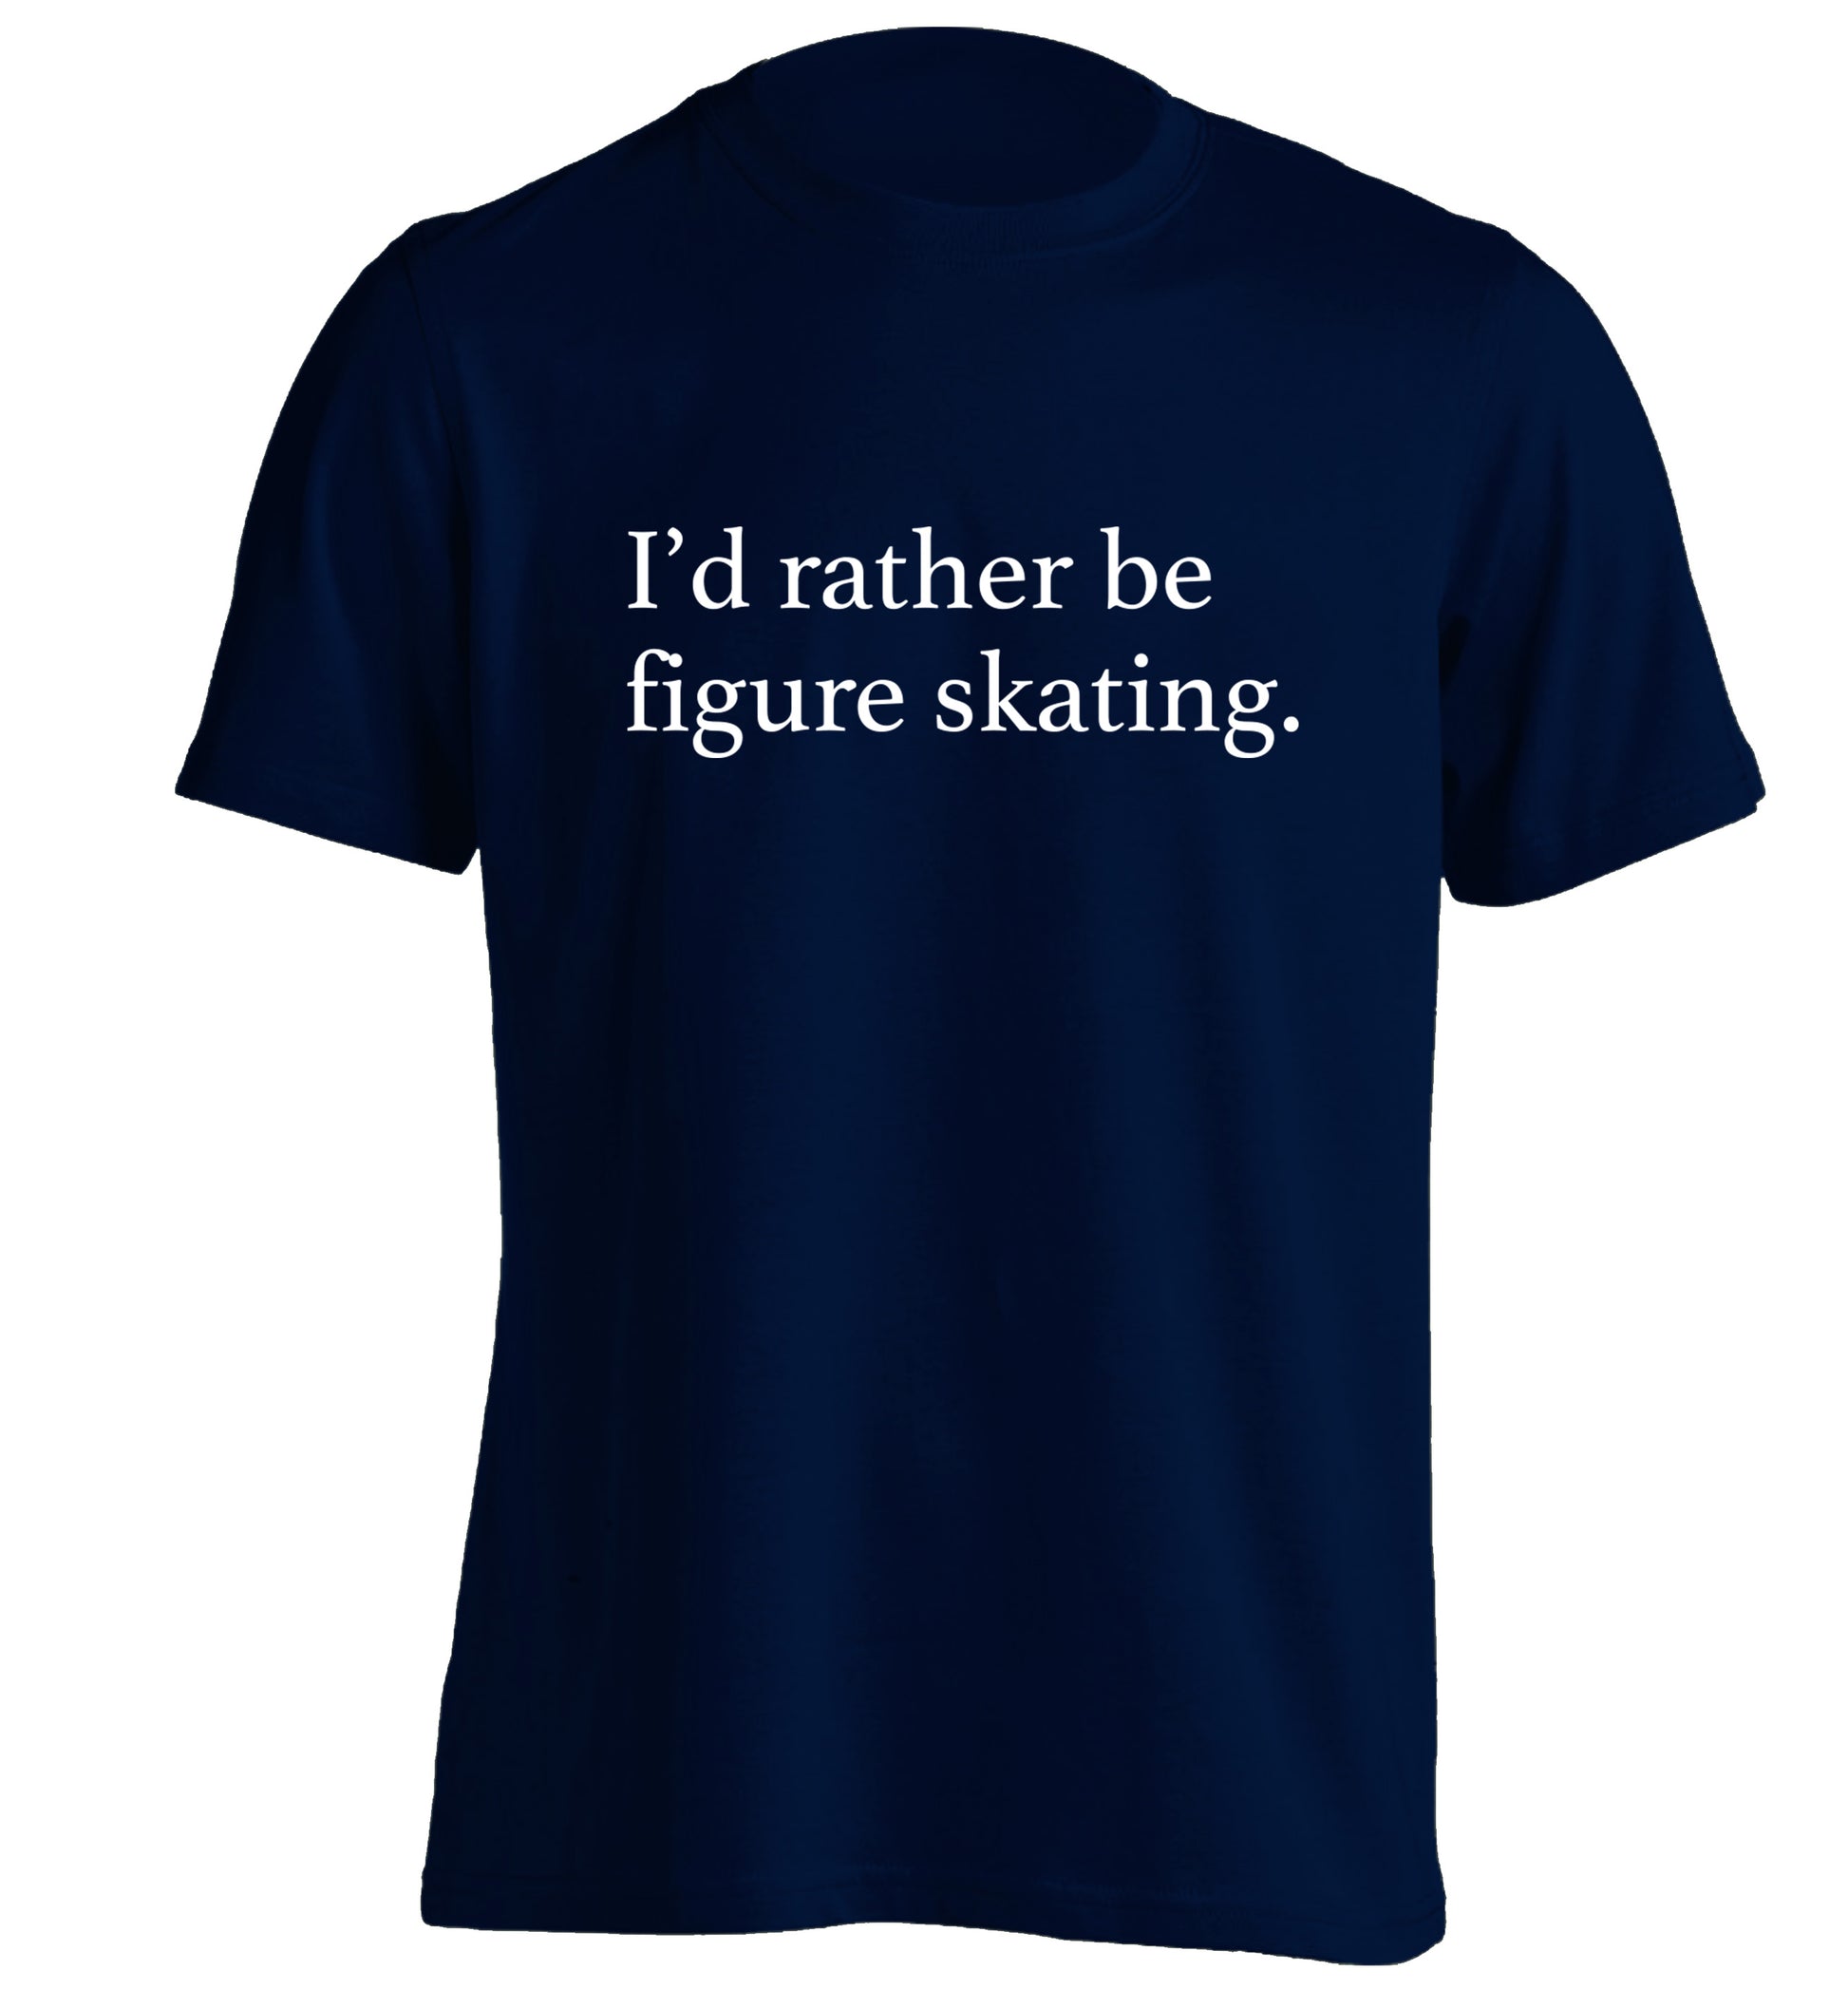 I'd rather be figure skating adults unisexnavy Tshirt 2XL